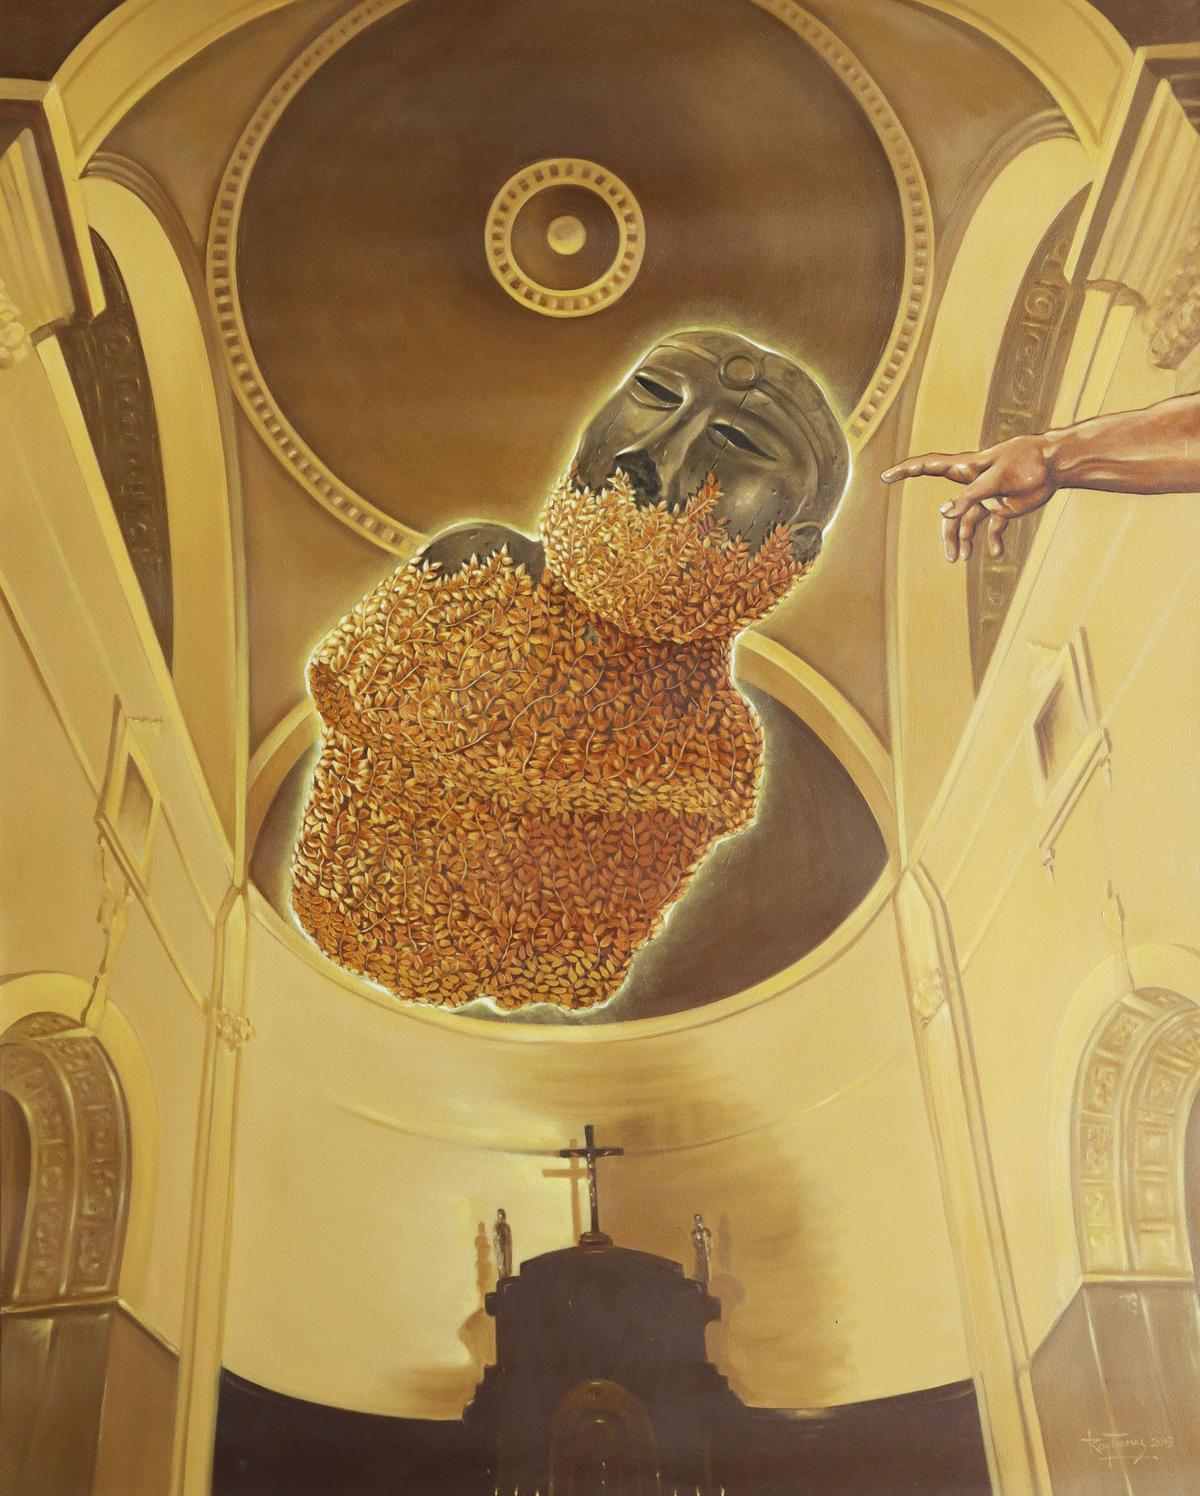 Contemporary artist Roy Thomas' painting The Halo and the Priest